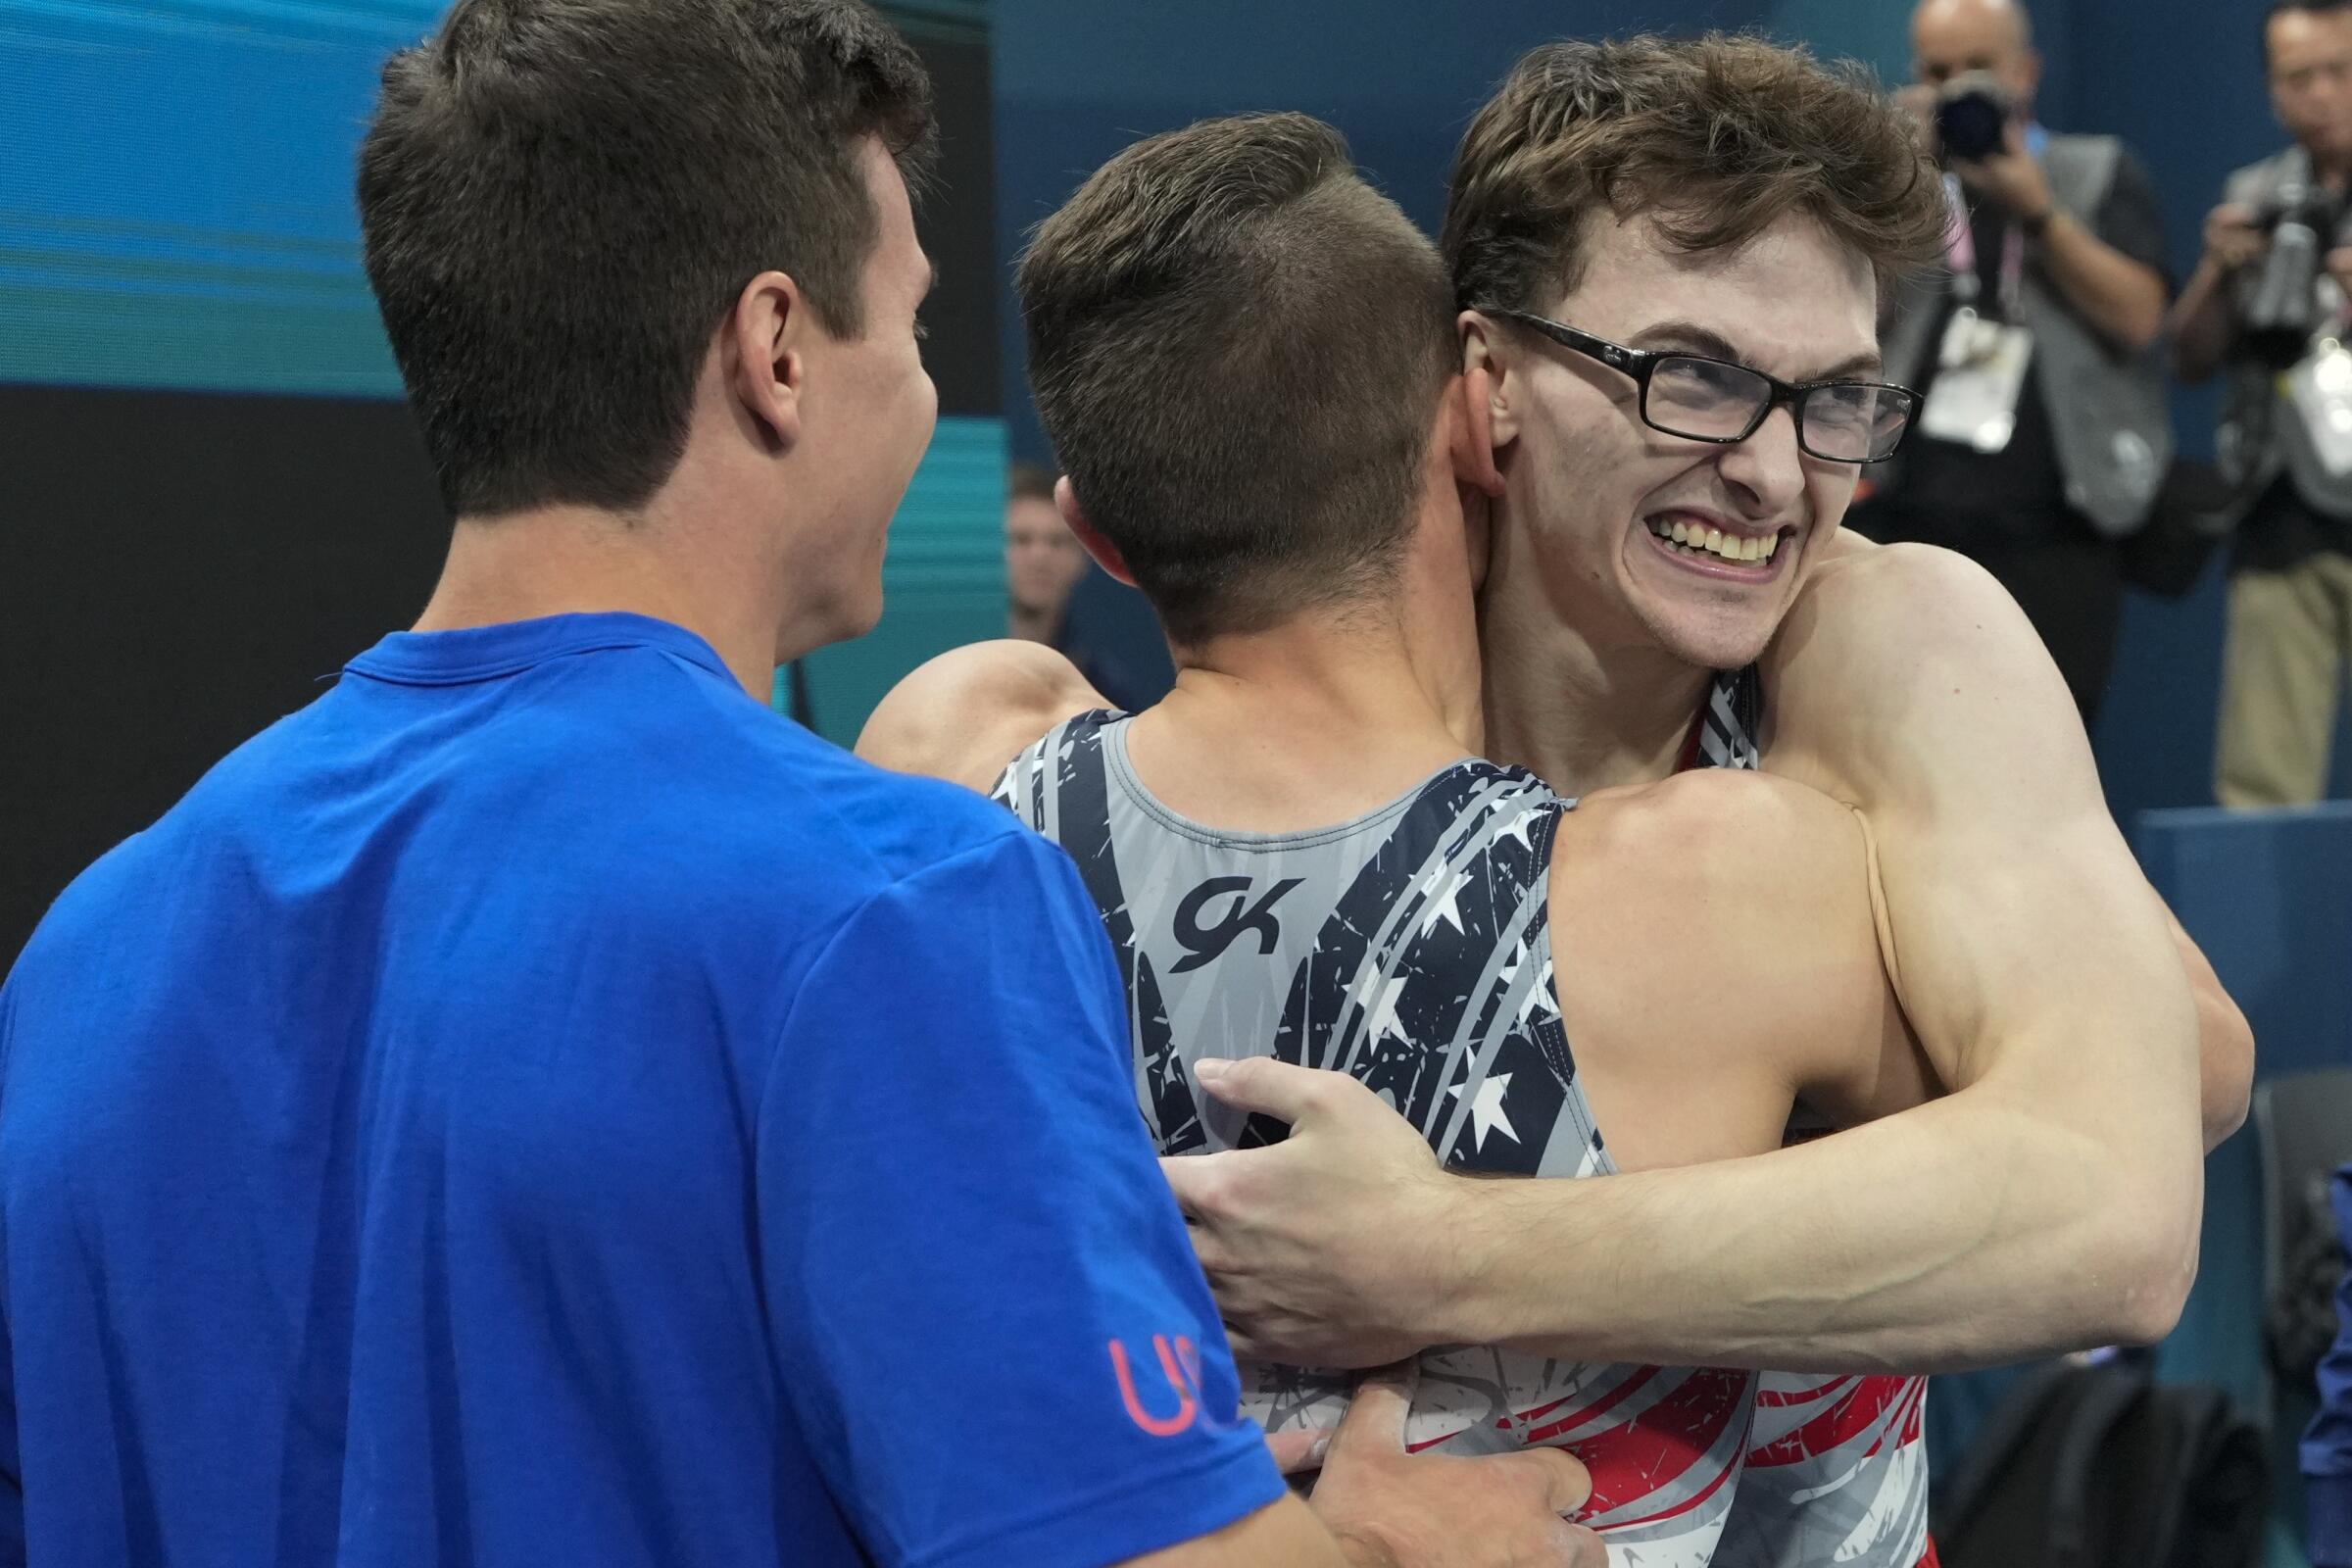 Stephen Nedoroscik of the U.S. gets a hug from Paul Juda after he completed his pommel horse routine 